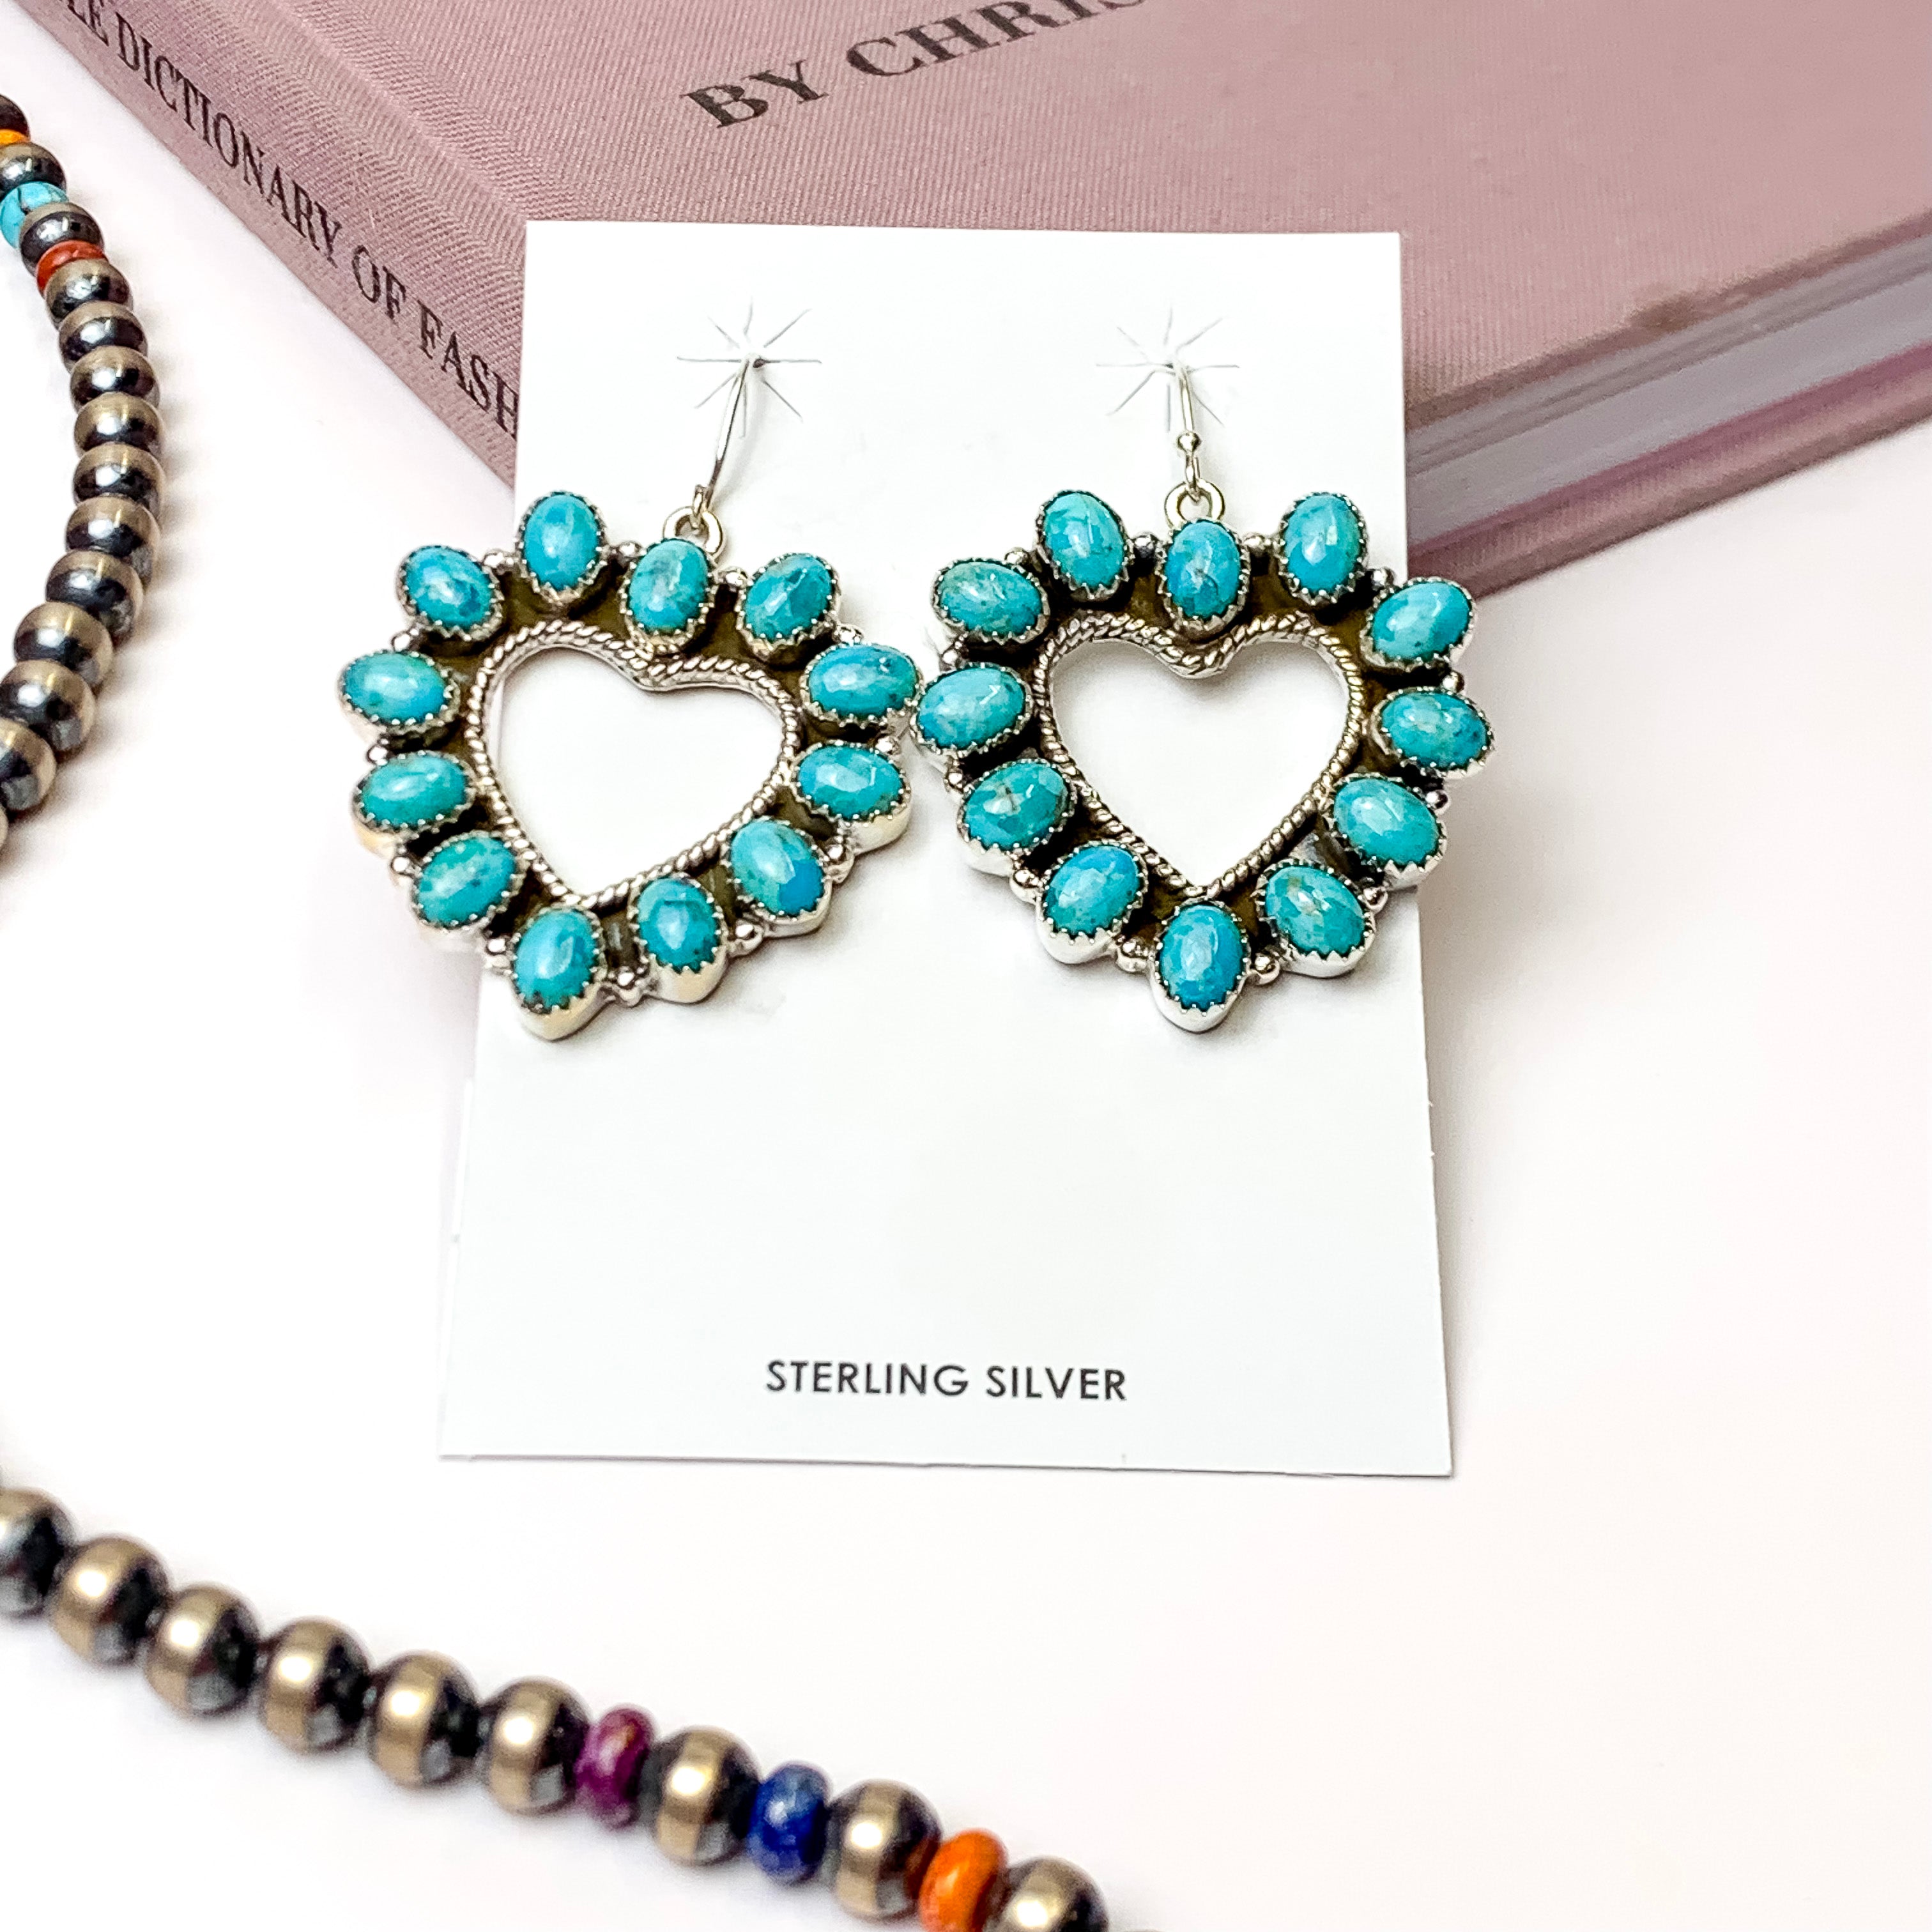 Hada Collection | Handmade Sterling Silver Open Heart Shaped Kingman Turquoise Drop Earrings - Giddy Up Glamour Boutique